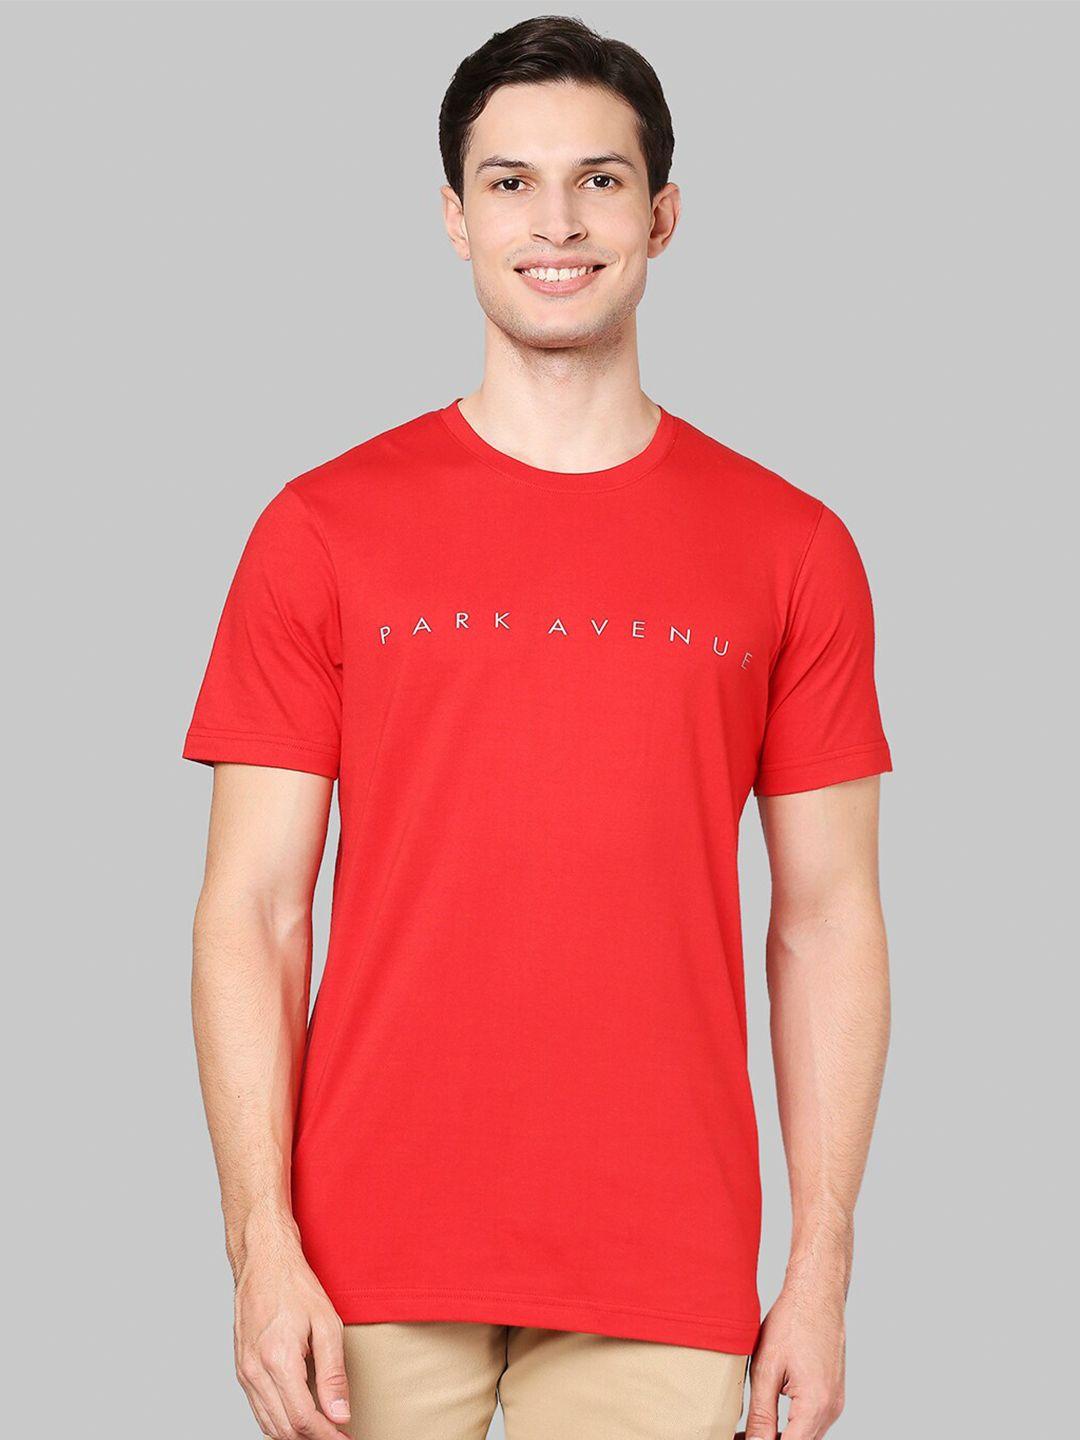 park-avenue-men-red-typography-printed-slim-fit-t-shirt